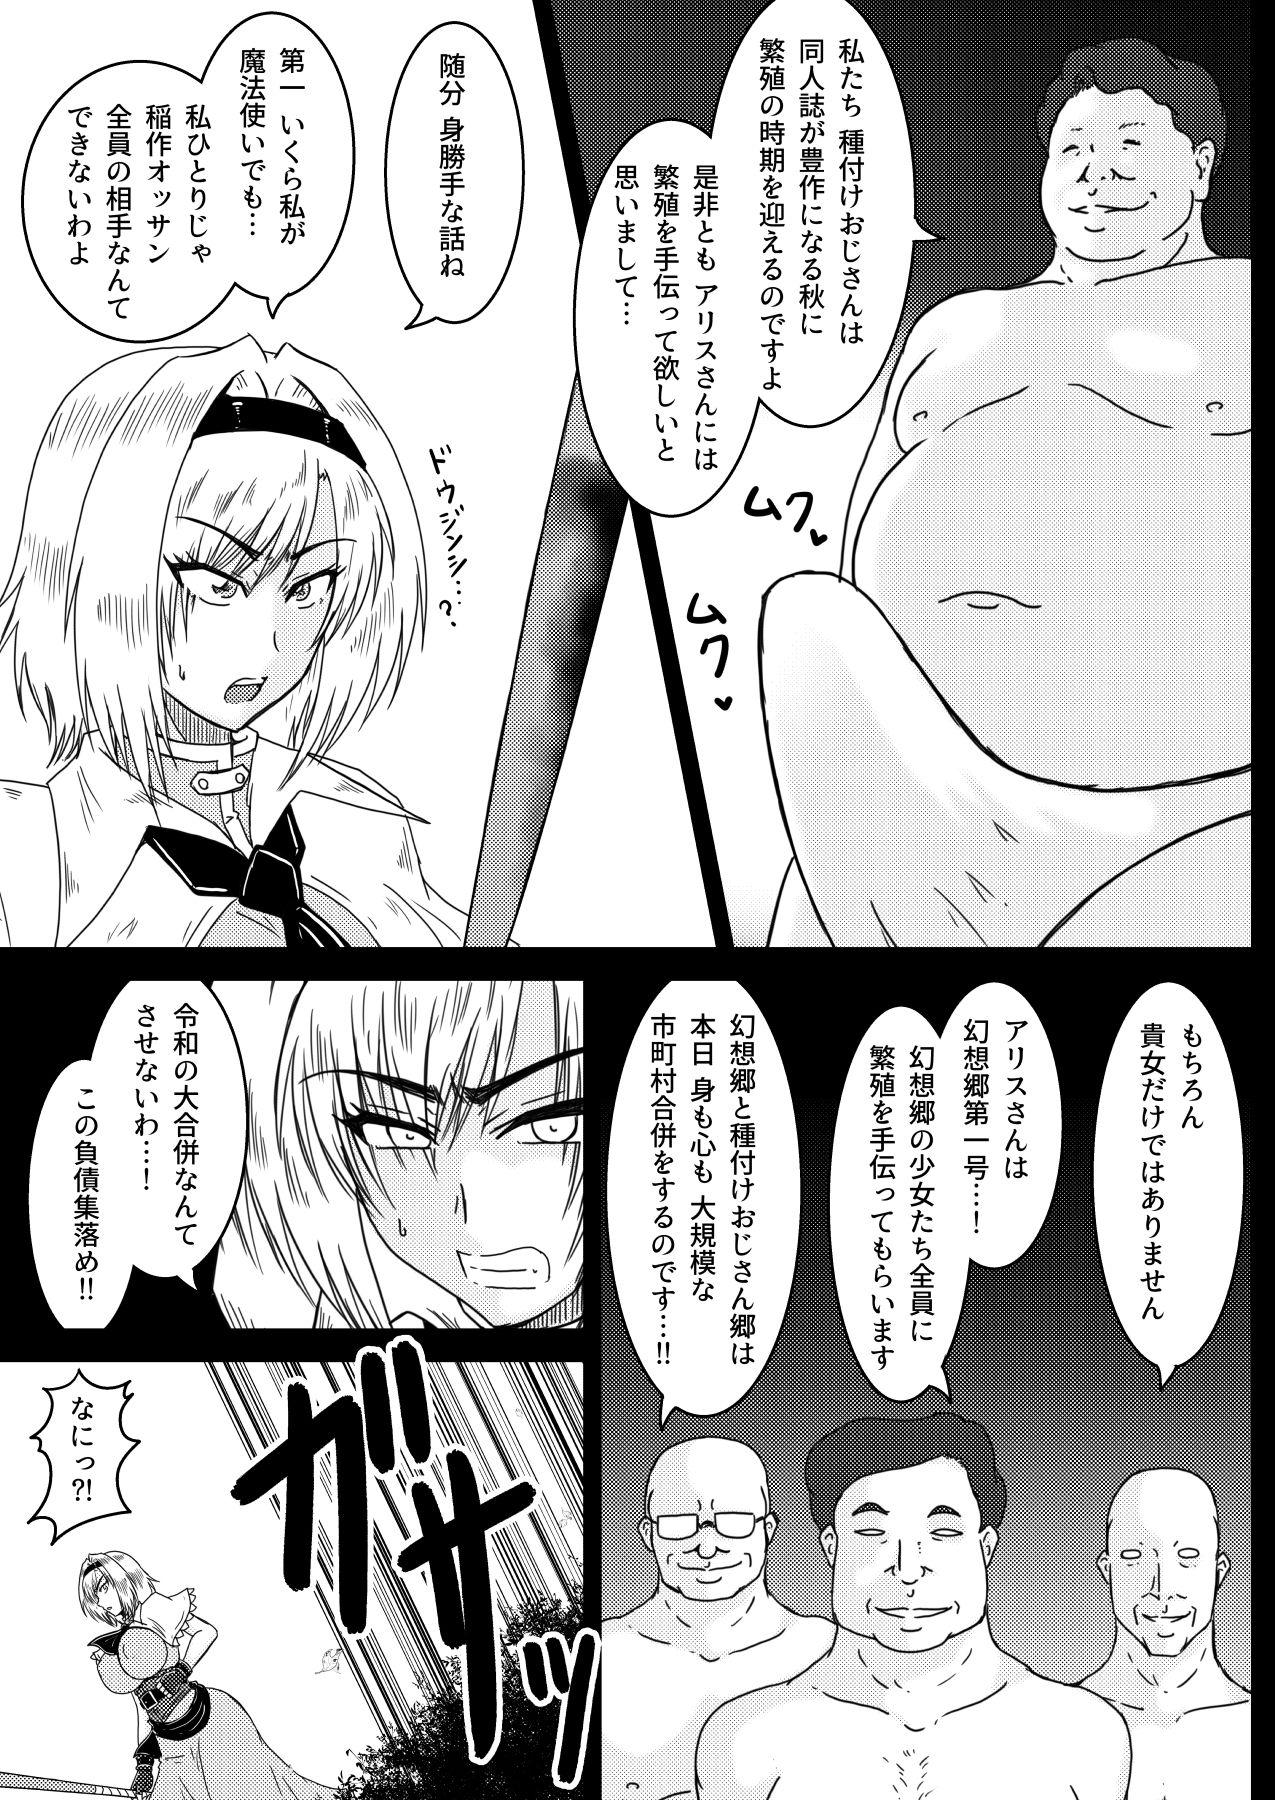 Sex 種付けおじさん百鬼夜行 - Touhou project Threesome - Page 6